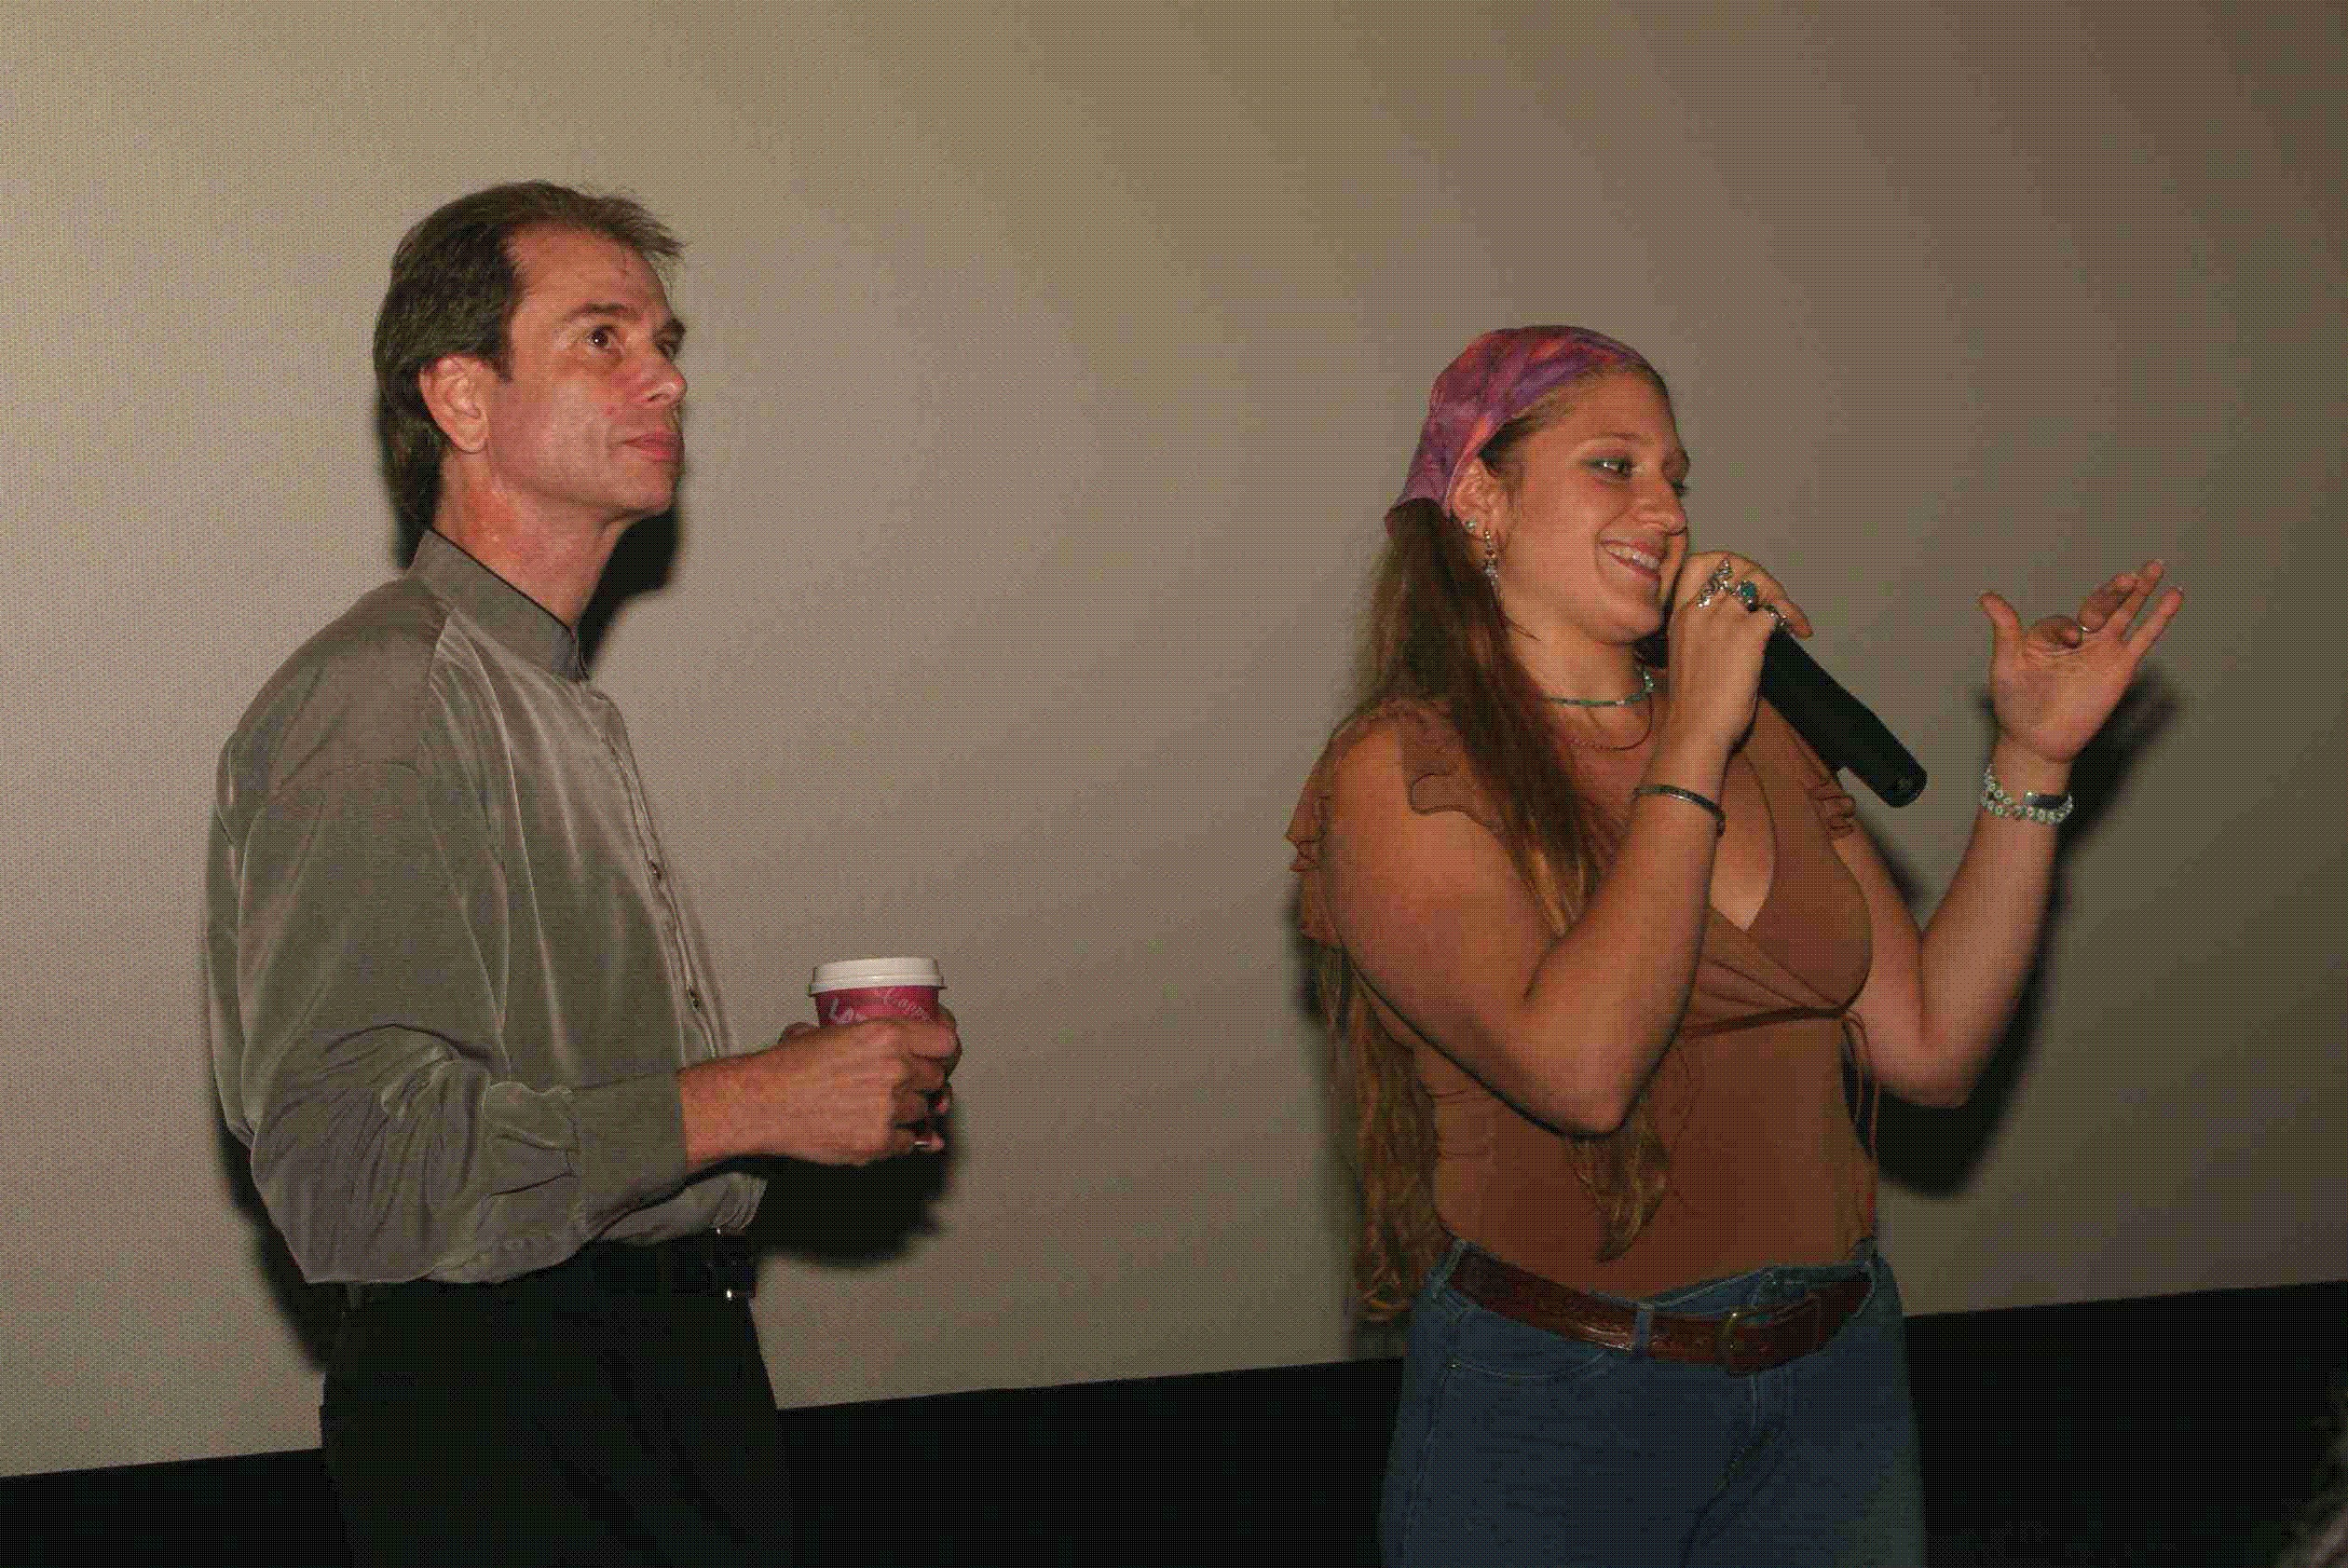 Bob Nuchow with Marisa Vural before Conversations screening/Q&A at Hollywood's ArcLight Theatre